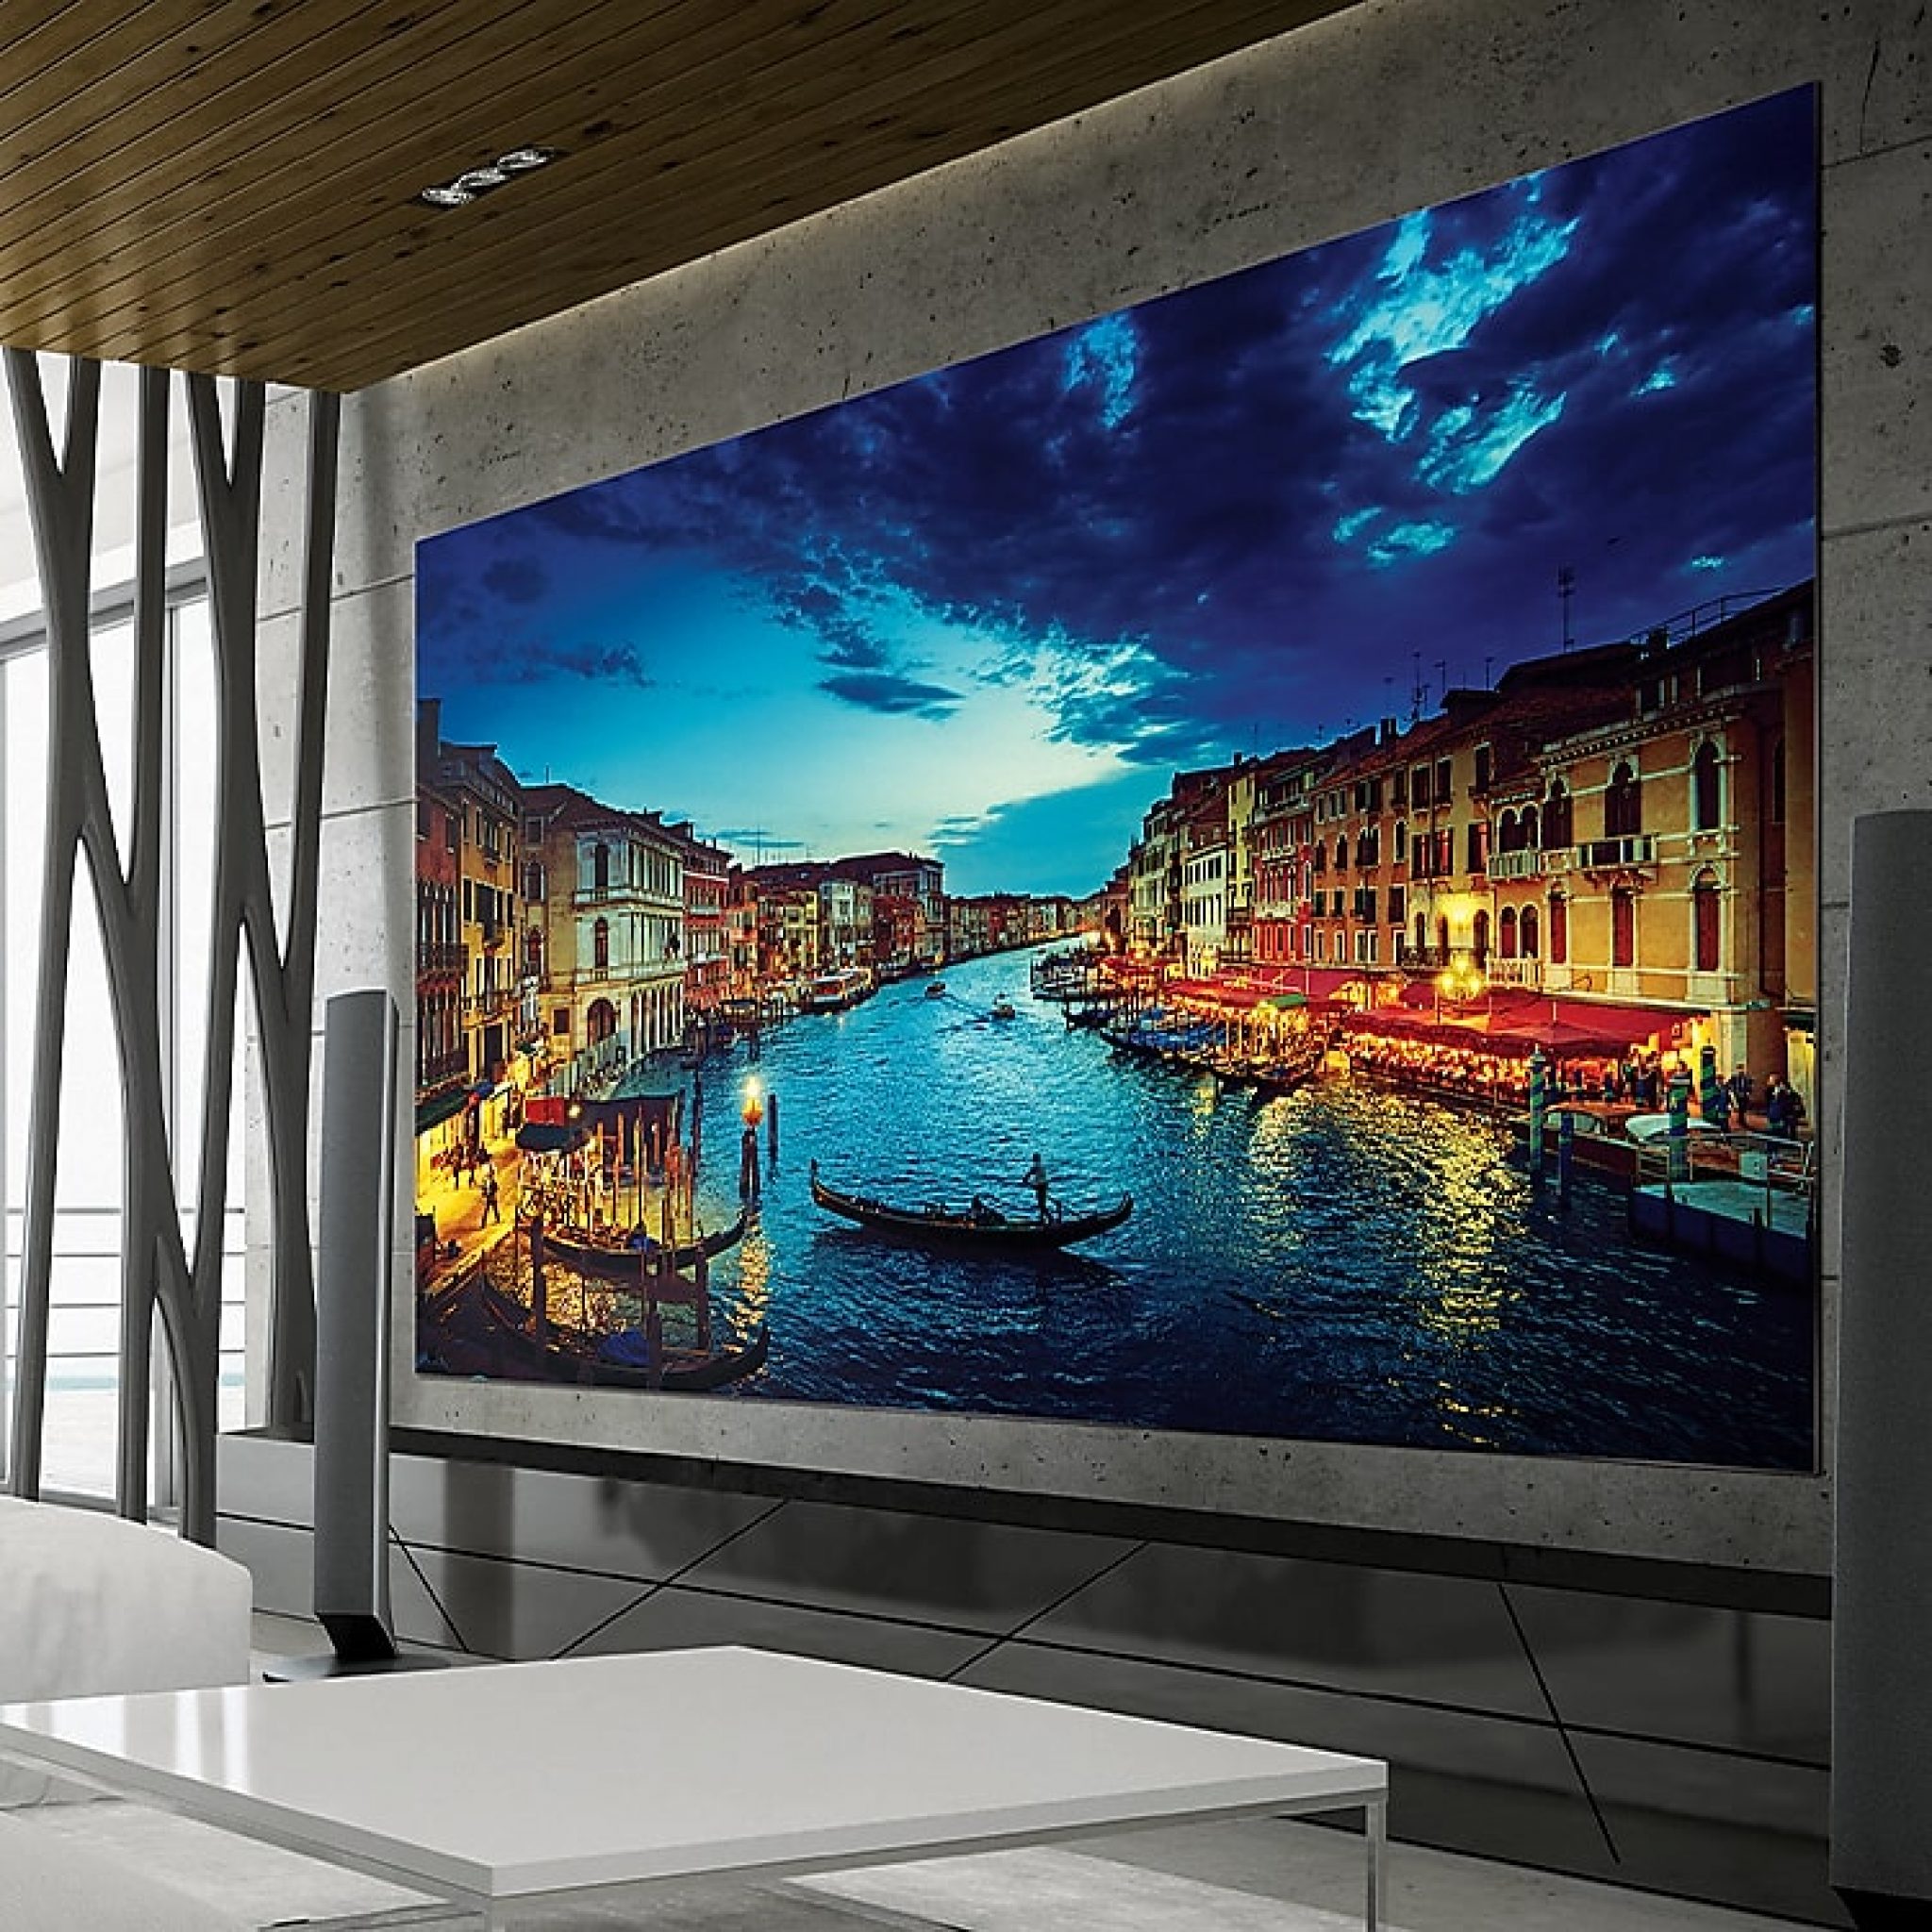 World's Biggest TV Size 1.7 Million Will Get You An Insanely Massive TV